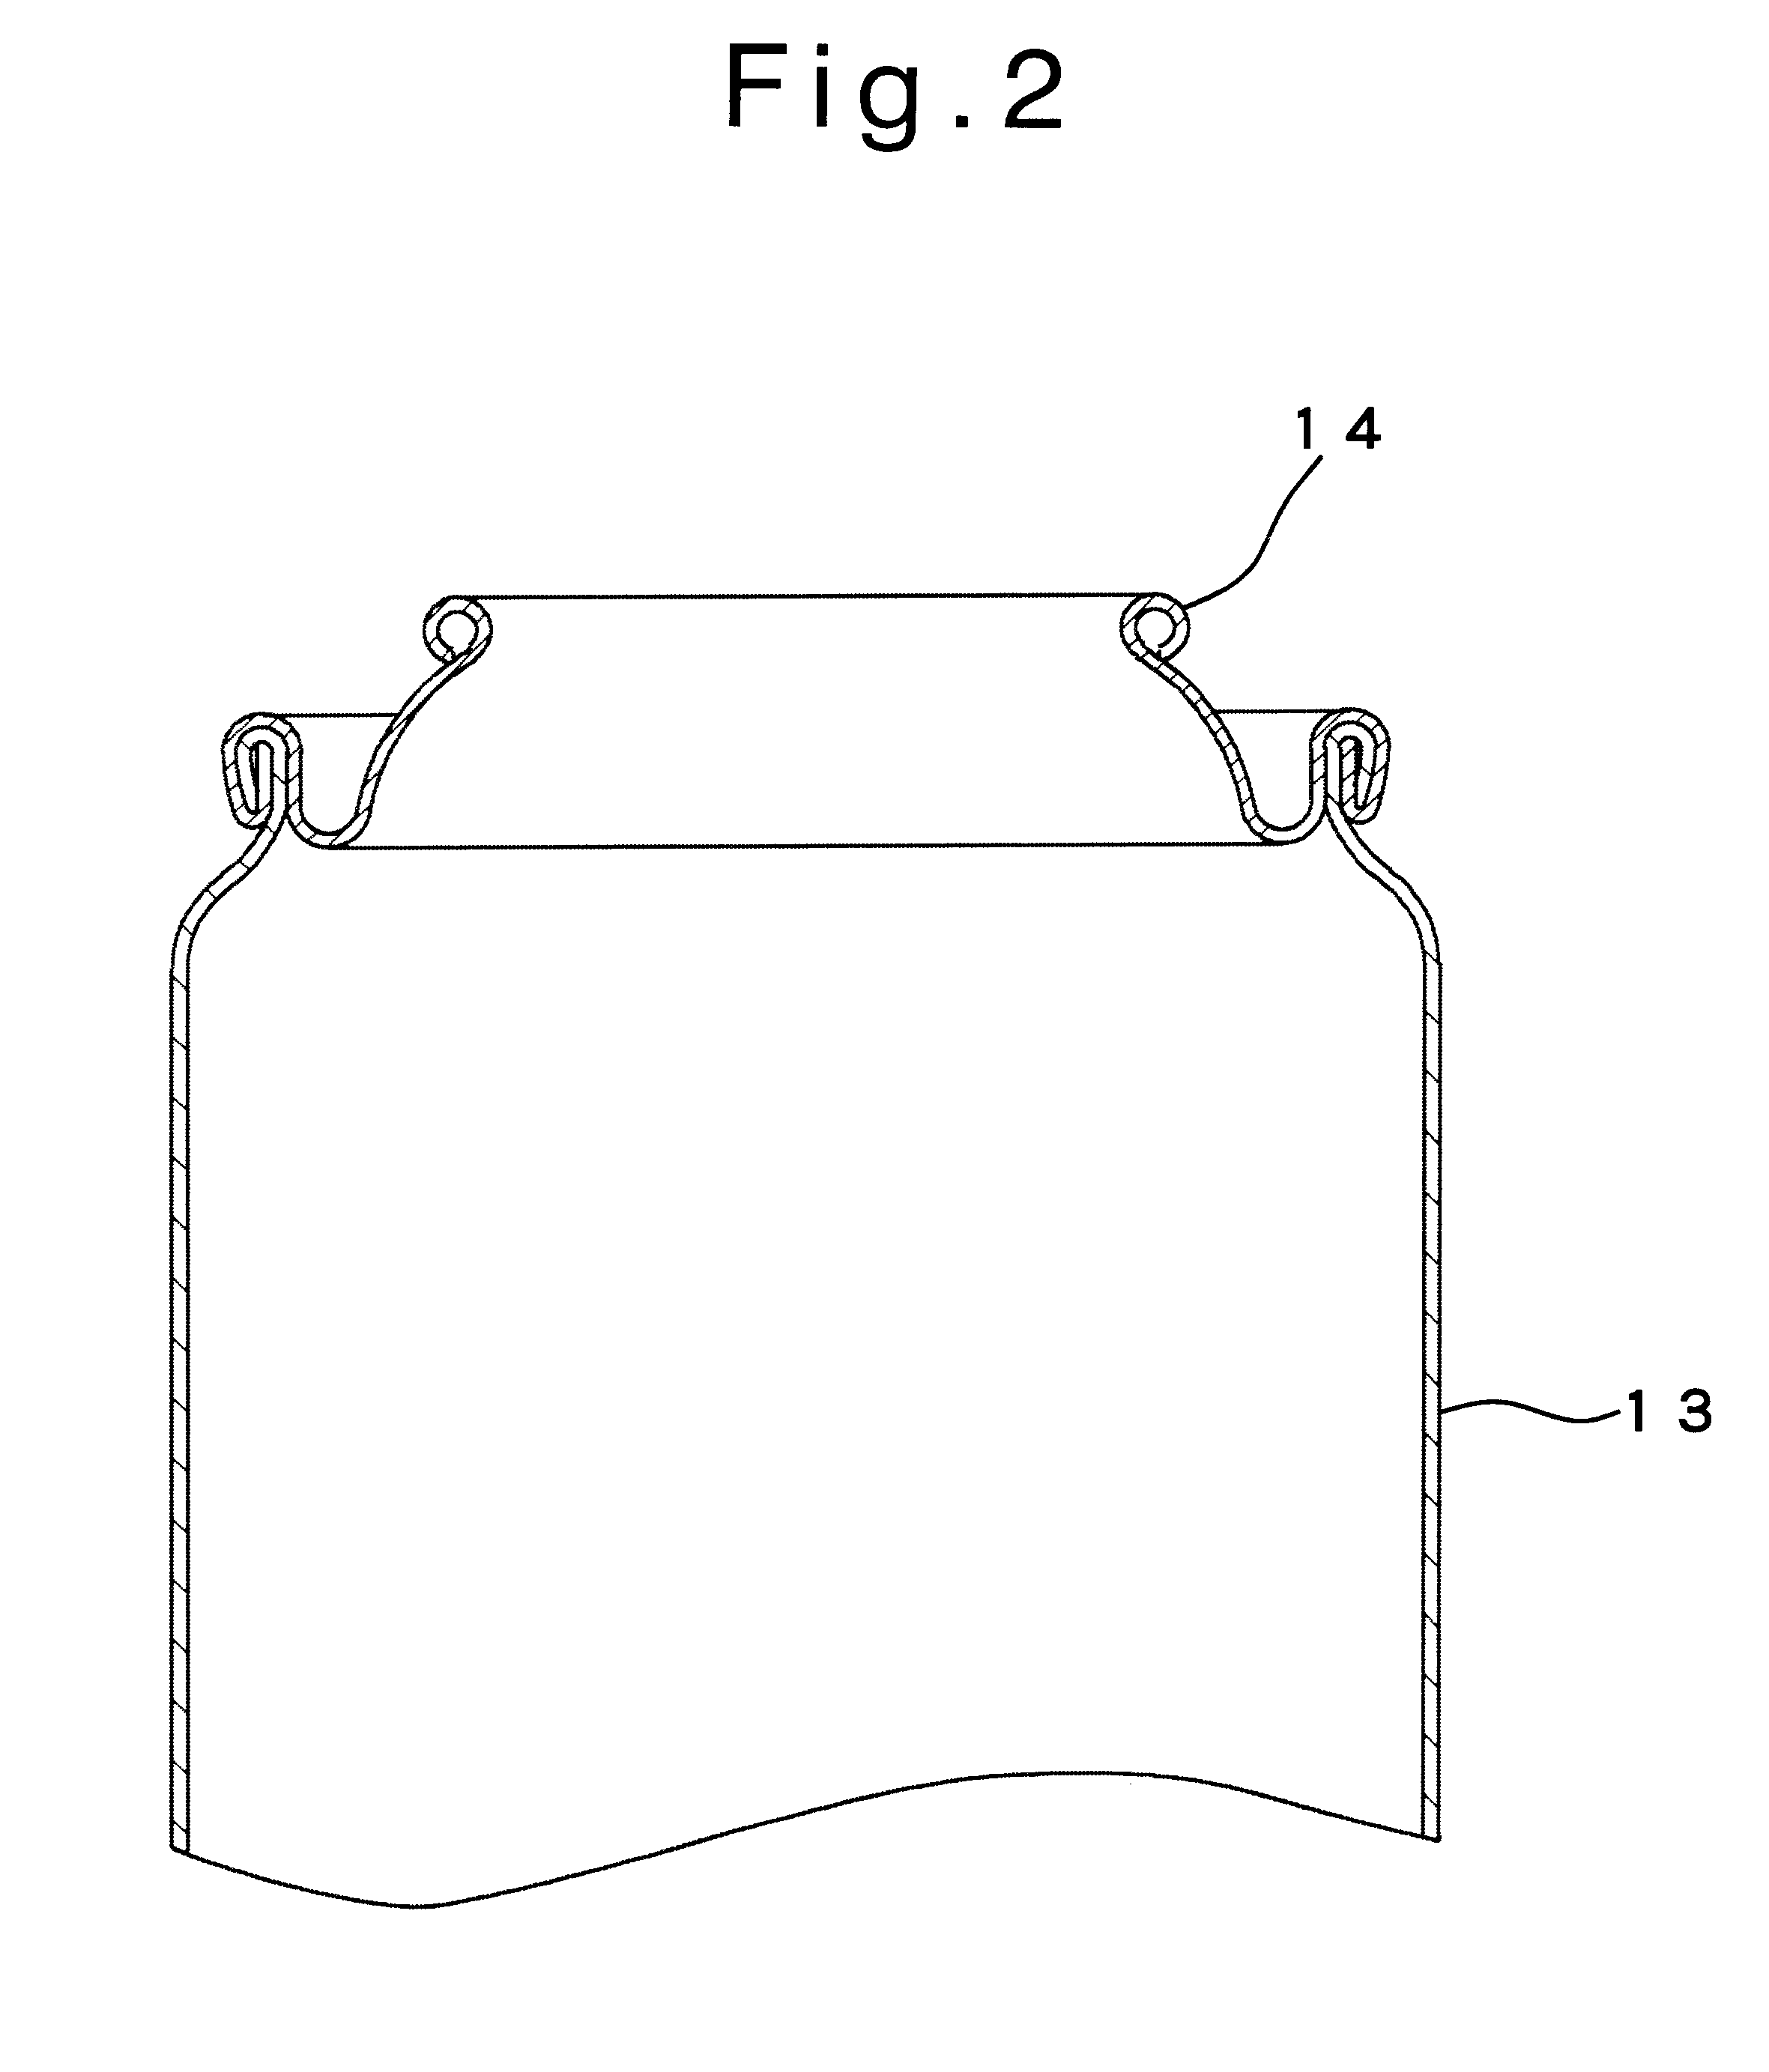 Double chamber aerosol container and manufacturing method therefor